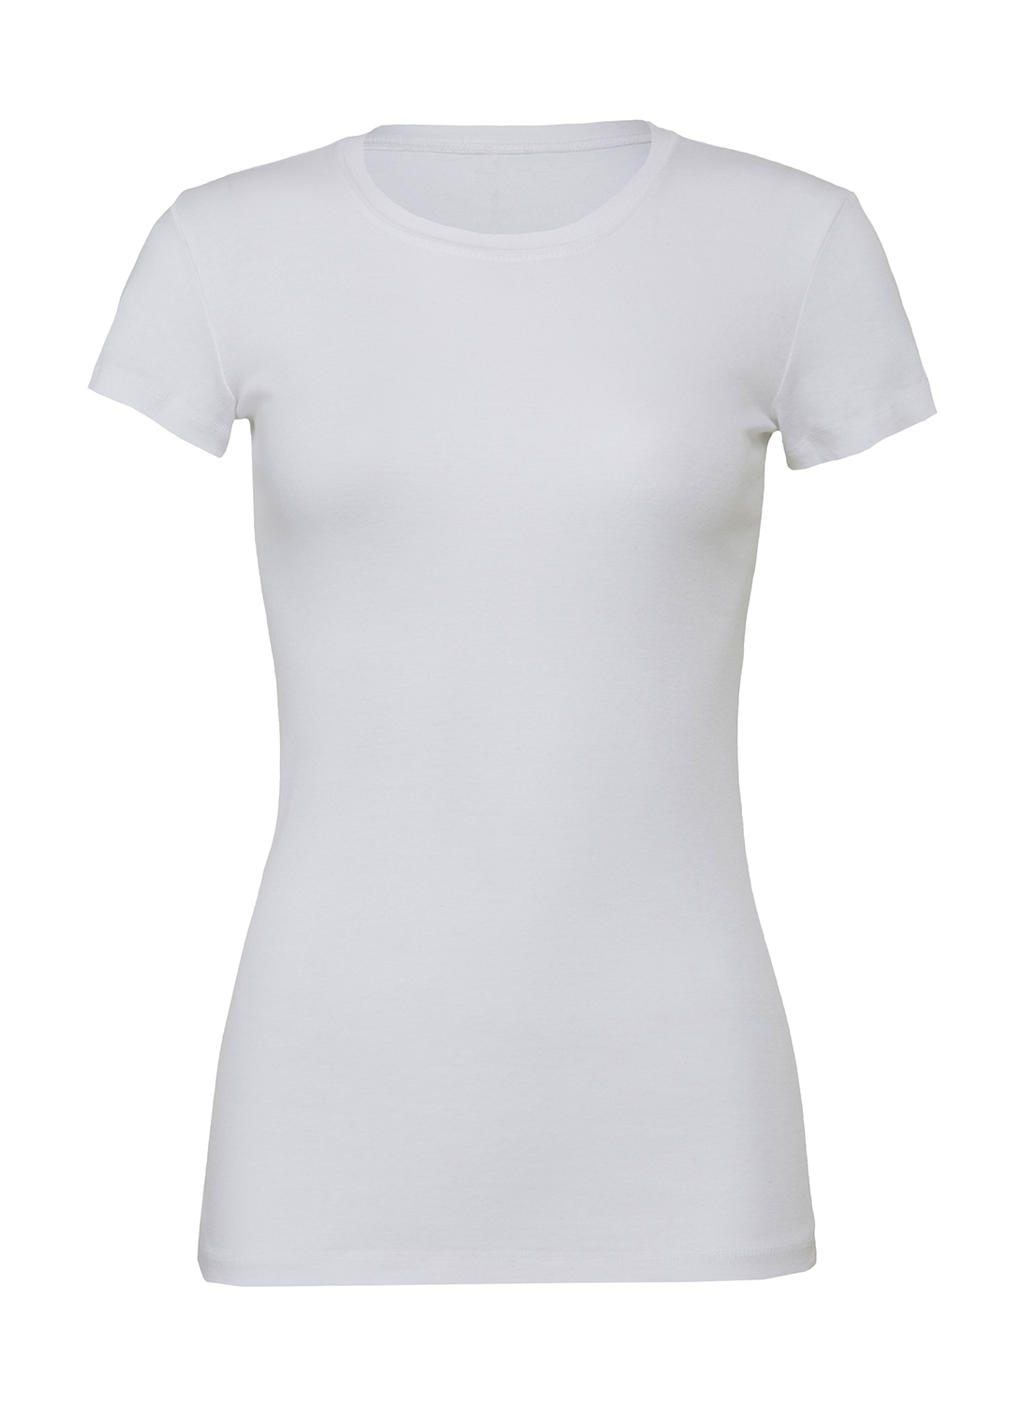  The Favorite T-Shirt in Farbe White